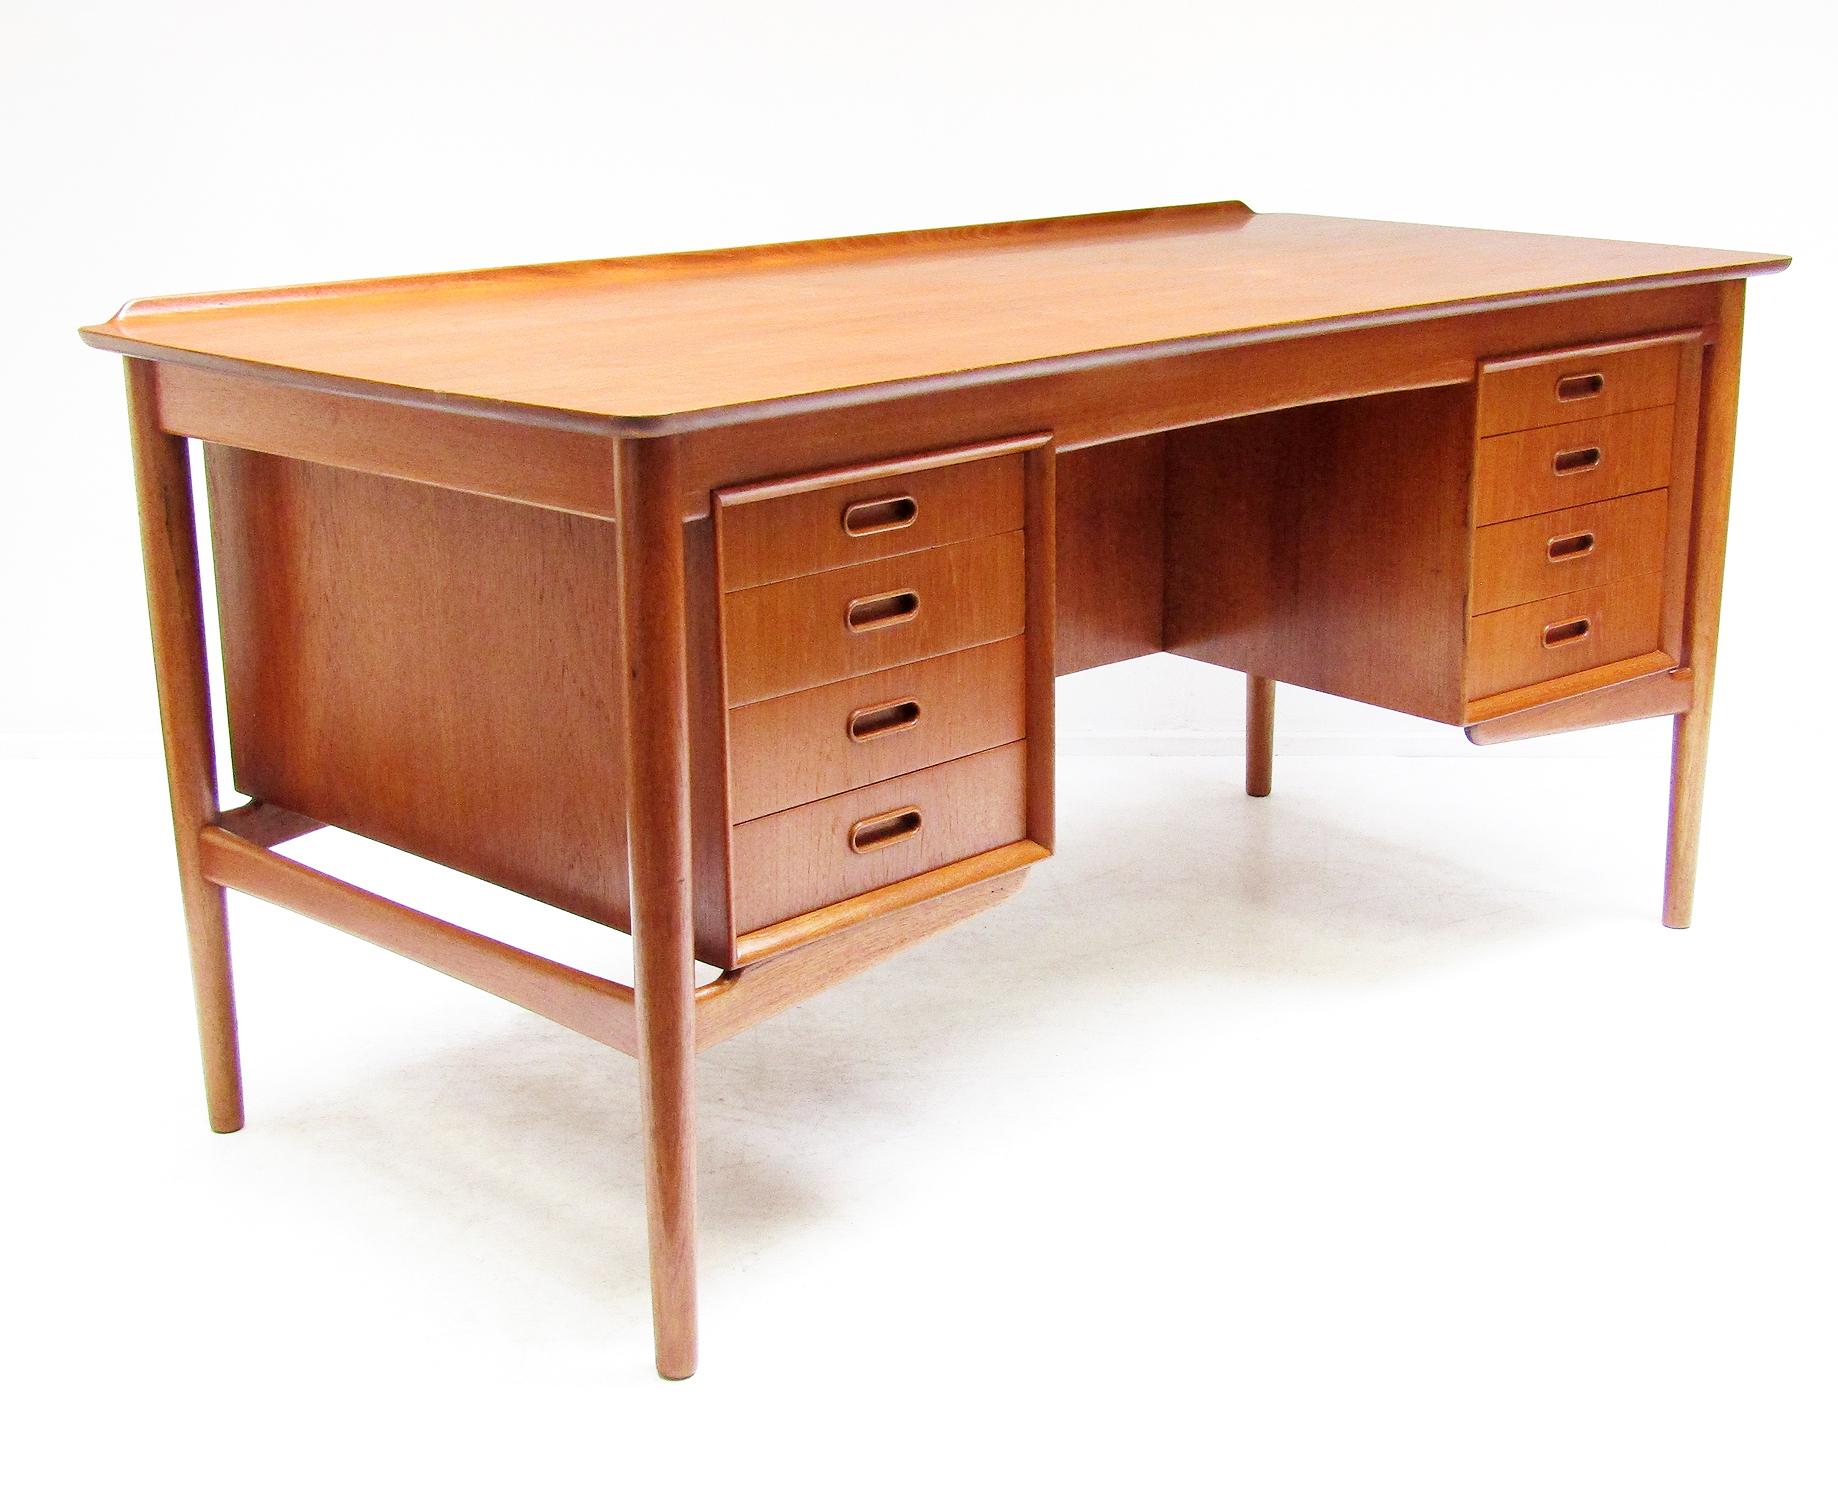 A 1960s desk in teak by Danish designer Svend Aage Madsen for Sigurd Hansen.

This finely crafted desk has a subtly curved writing surface with sculpted rear lip. It sits on tapering legs, with a bank of four smooth drawers on each side of the